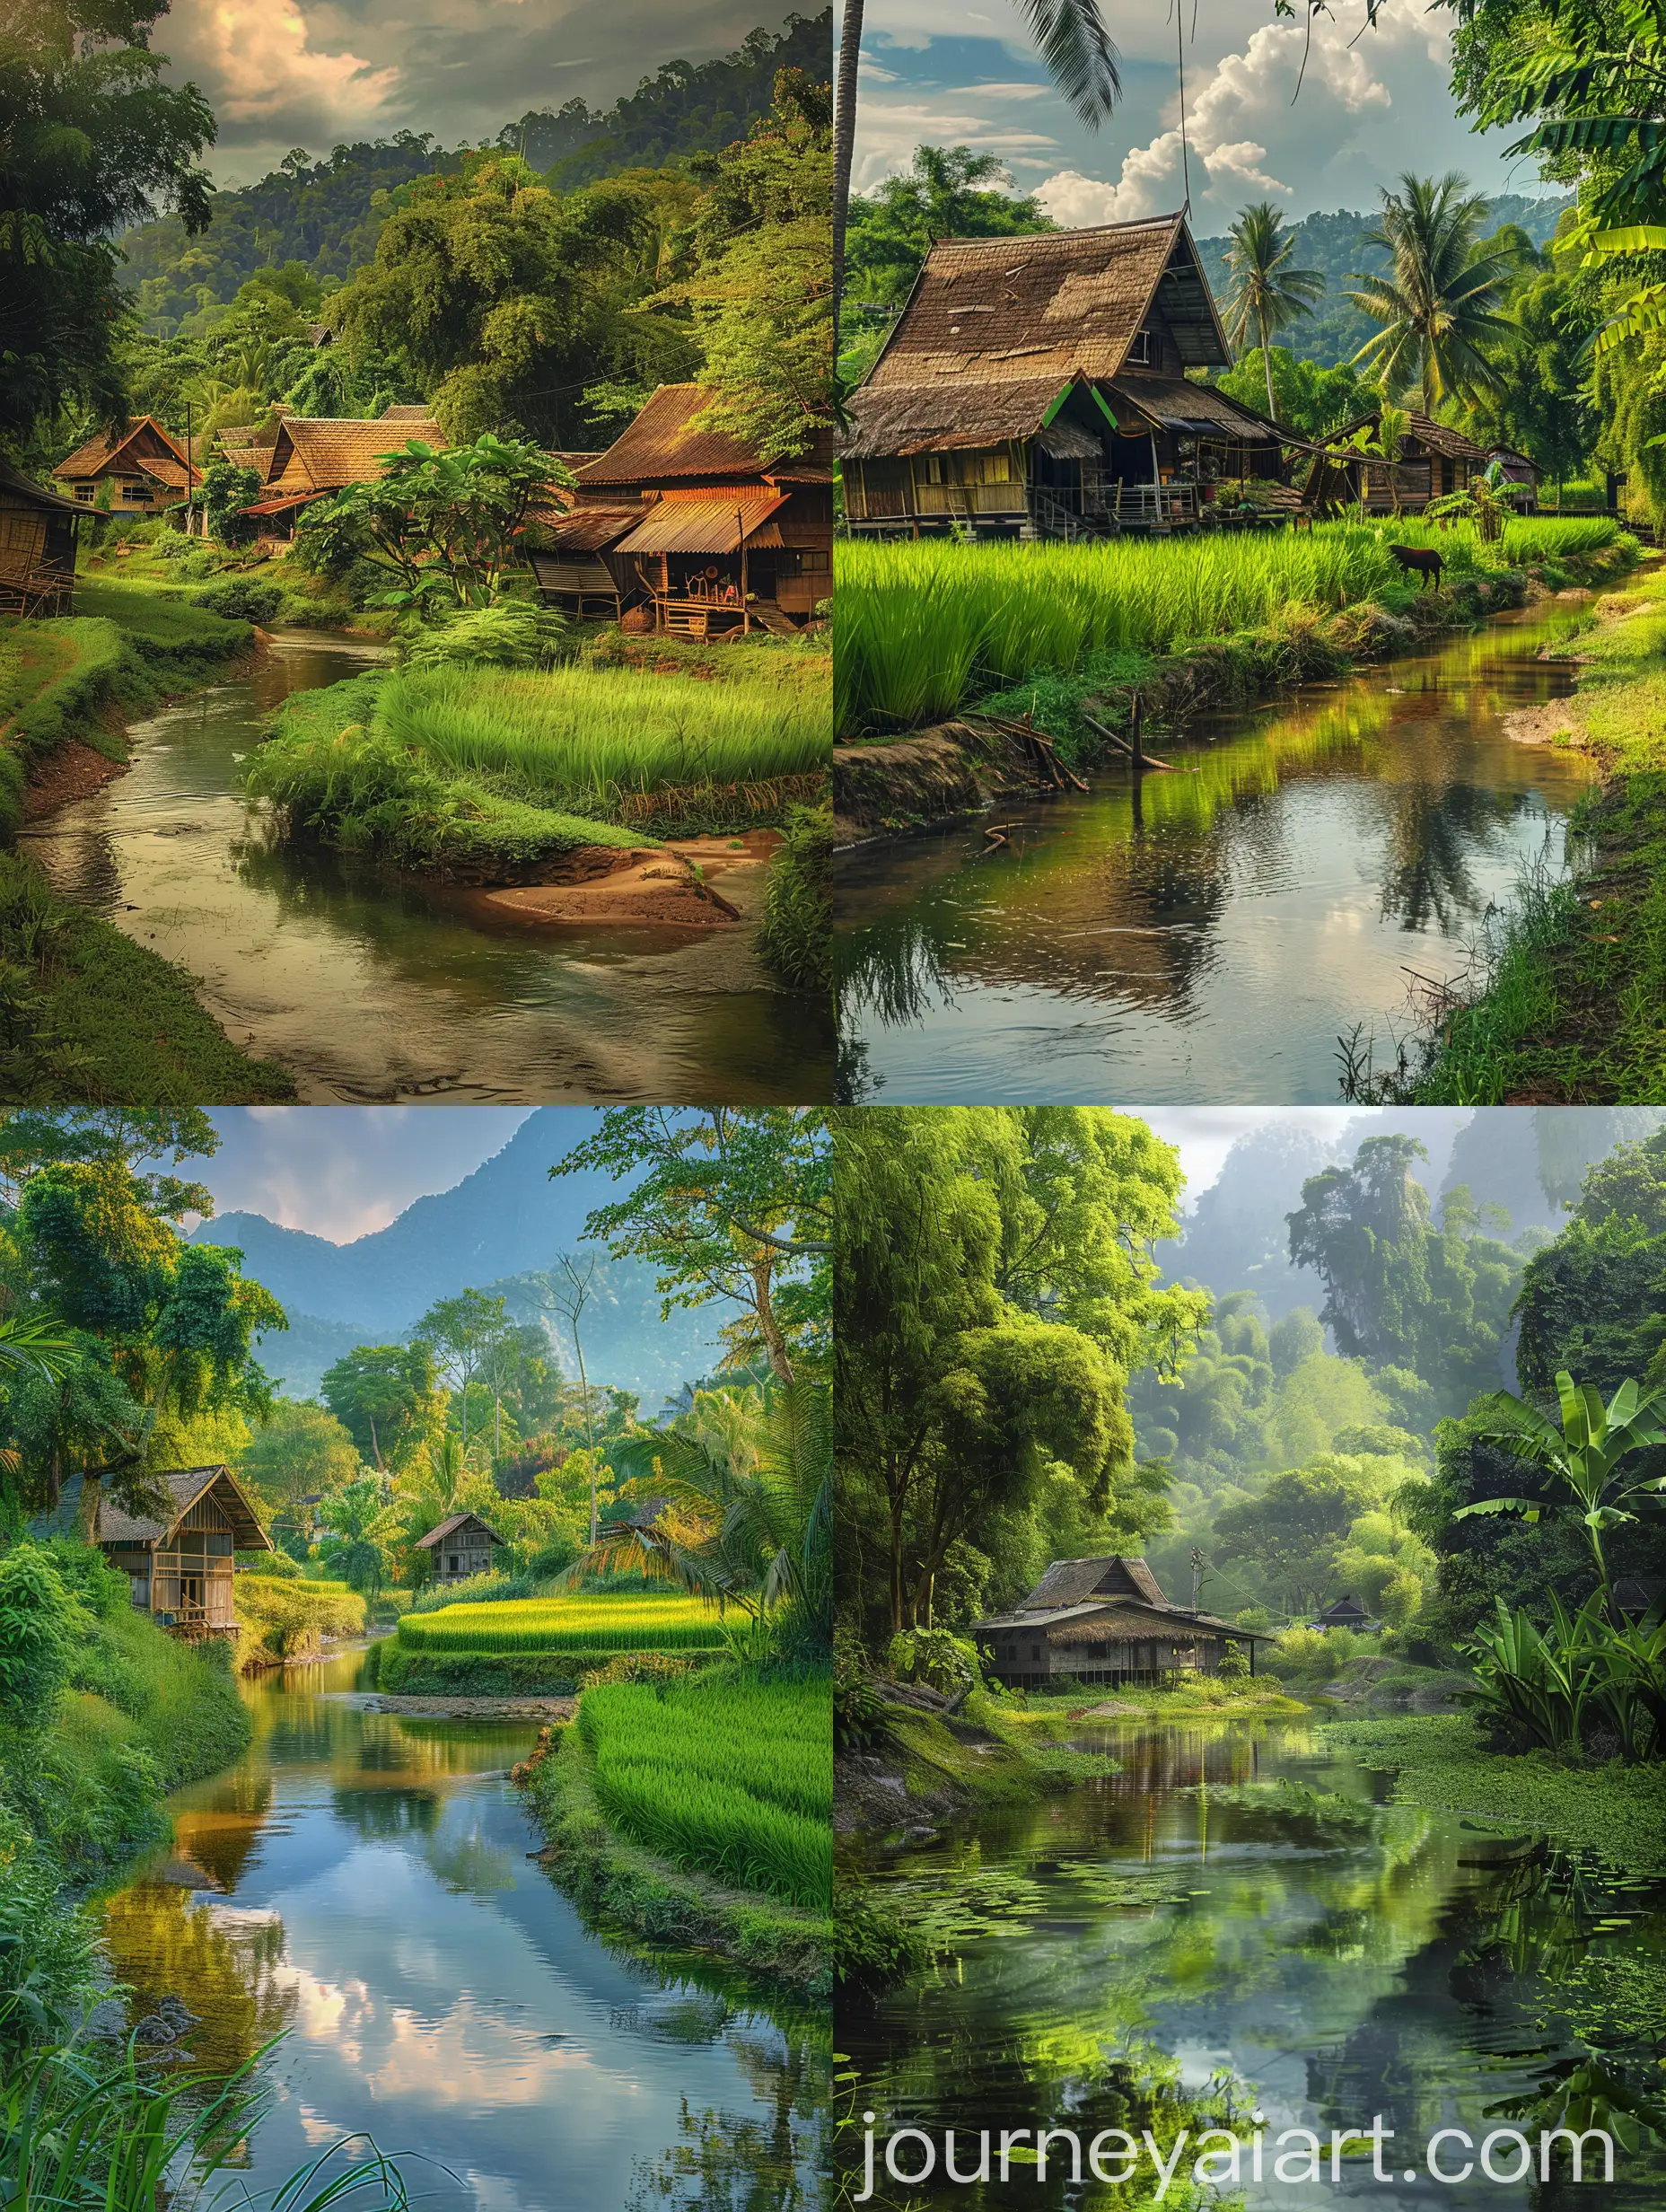 Serene-Landscape-of-an-Old-Thai-Village-with-Winding-River-and-Lush-Green-Paddy-Fields